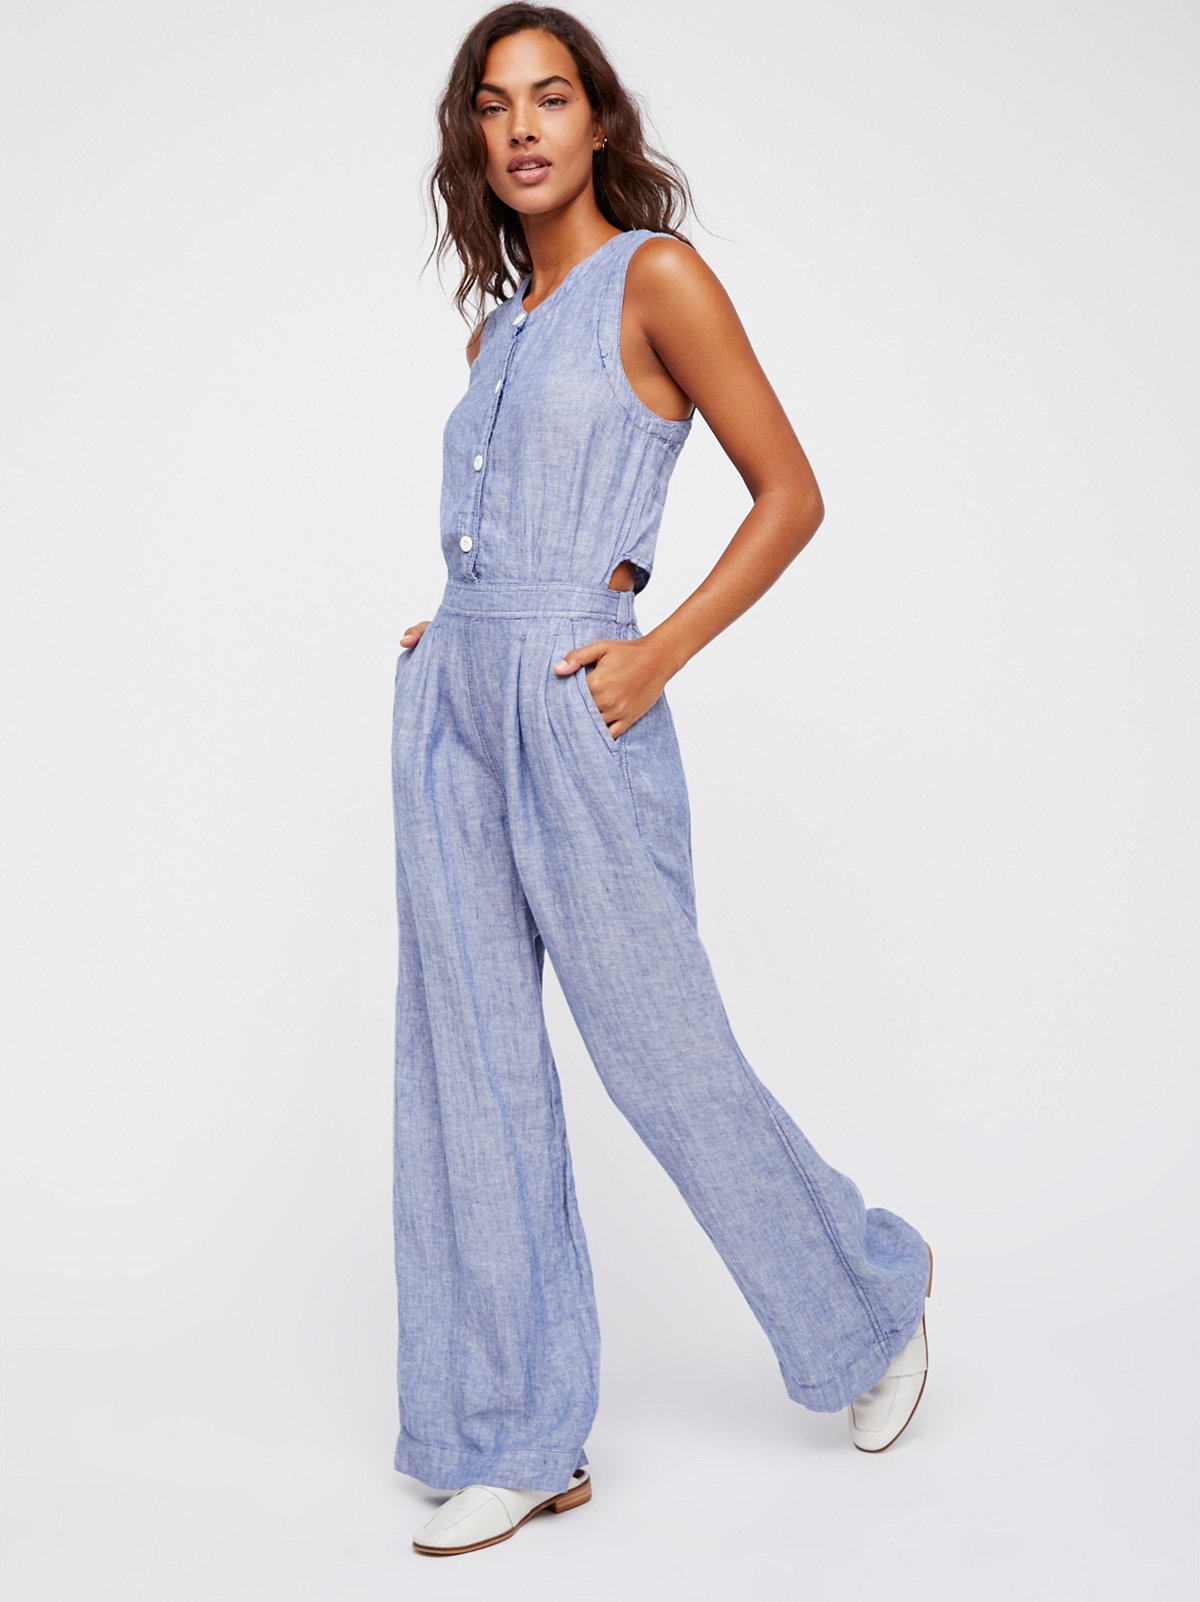 Cute Jumpsuits & Rompers for Women | Free People